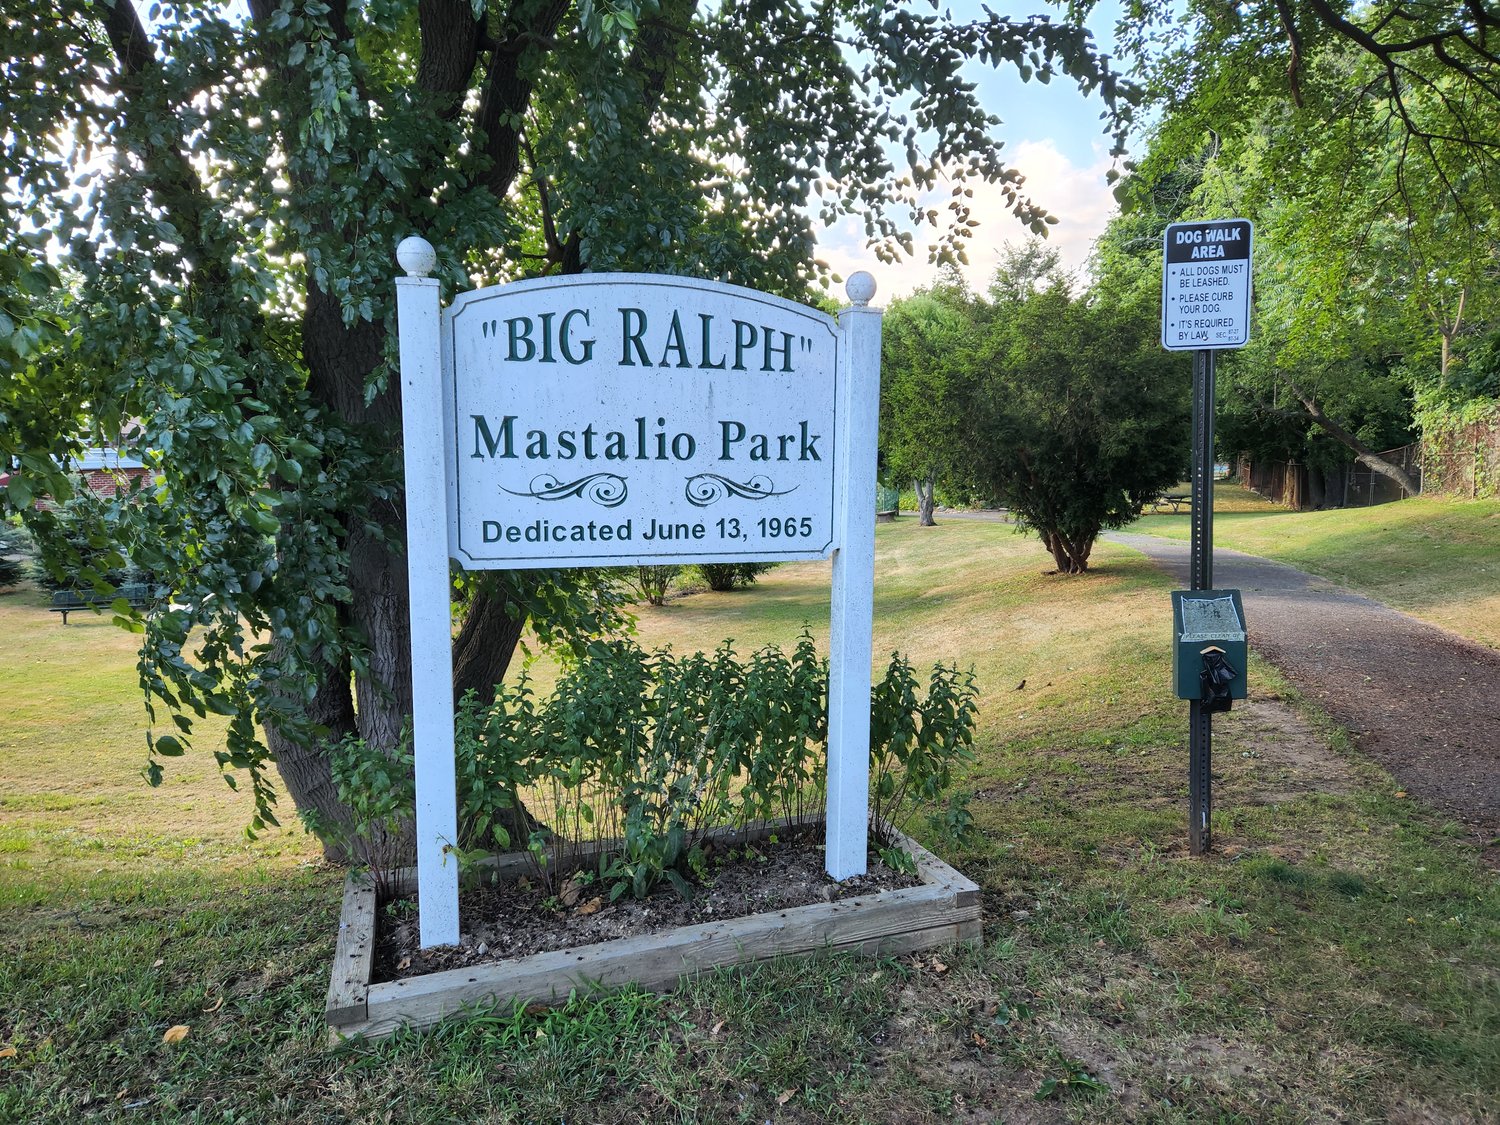 In 2013, Big Ralph Park was rededicated to Big Ralph Mastalio, who served in both World War I and World War II. He received the Bronze Star and Purple Heart. Mastalio, who was committed to the city, volunteered as a fireman for Glen Cove for 32 years.